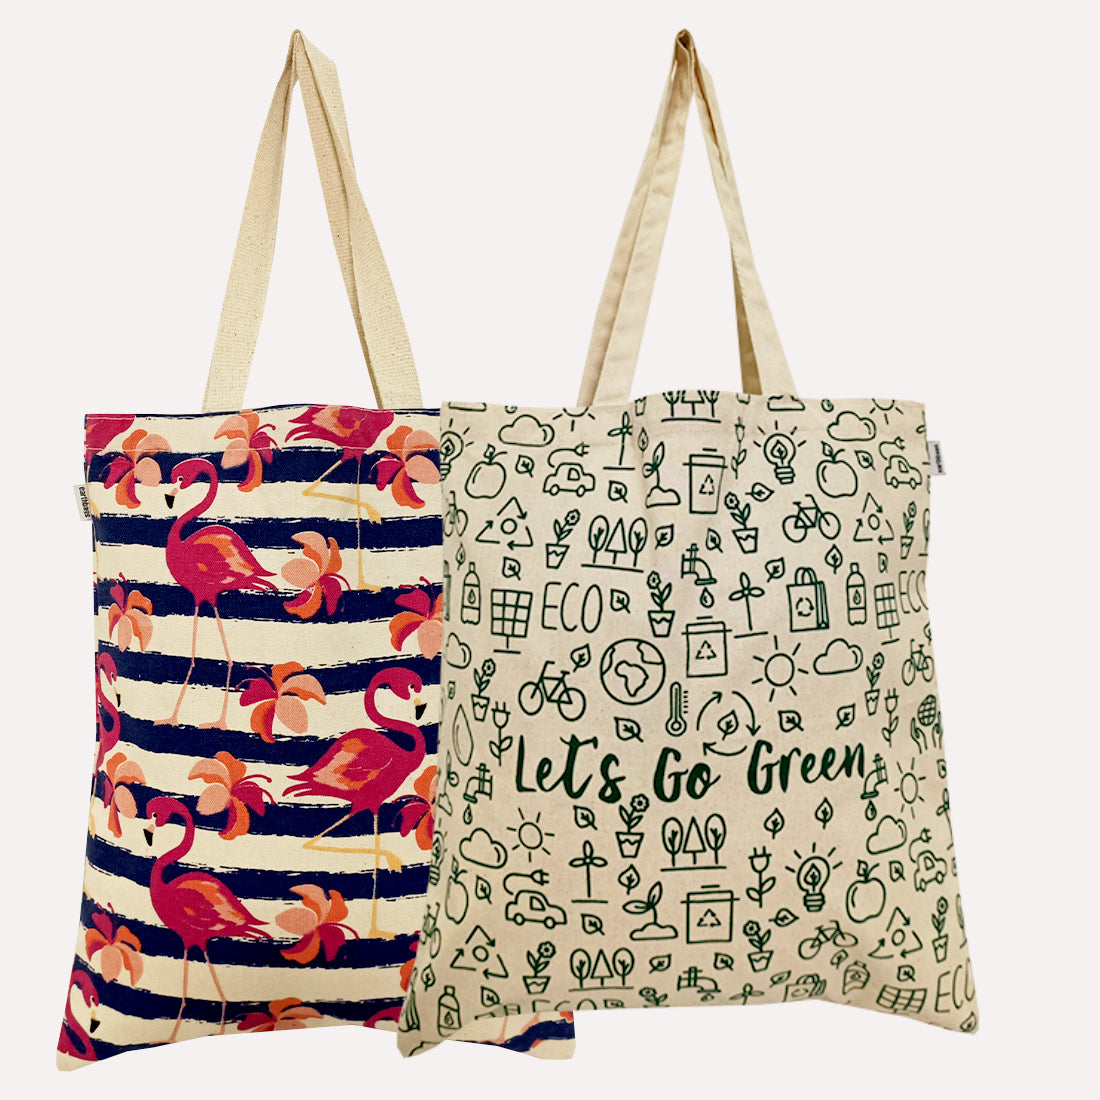 EARTHBAGS PRINTED COTTON TOTE BAGS – PACK OF 2